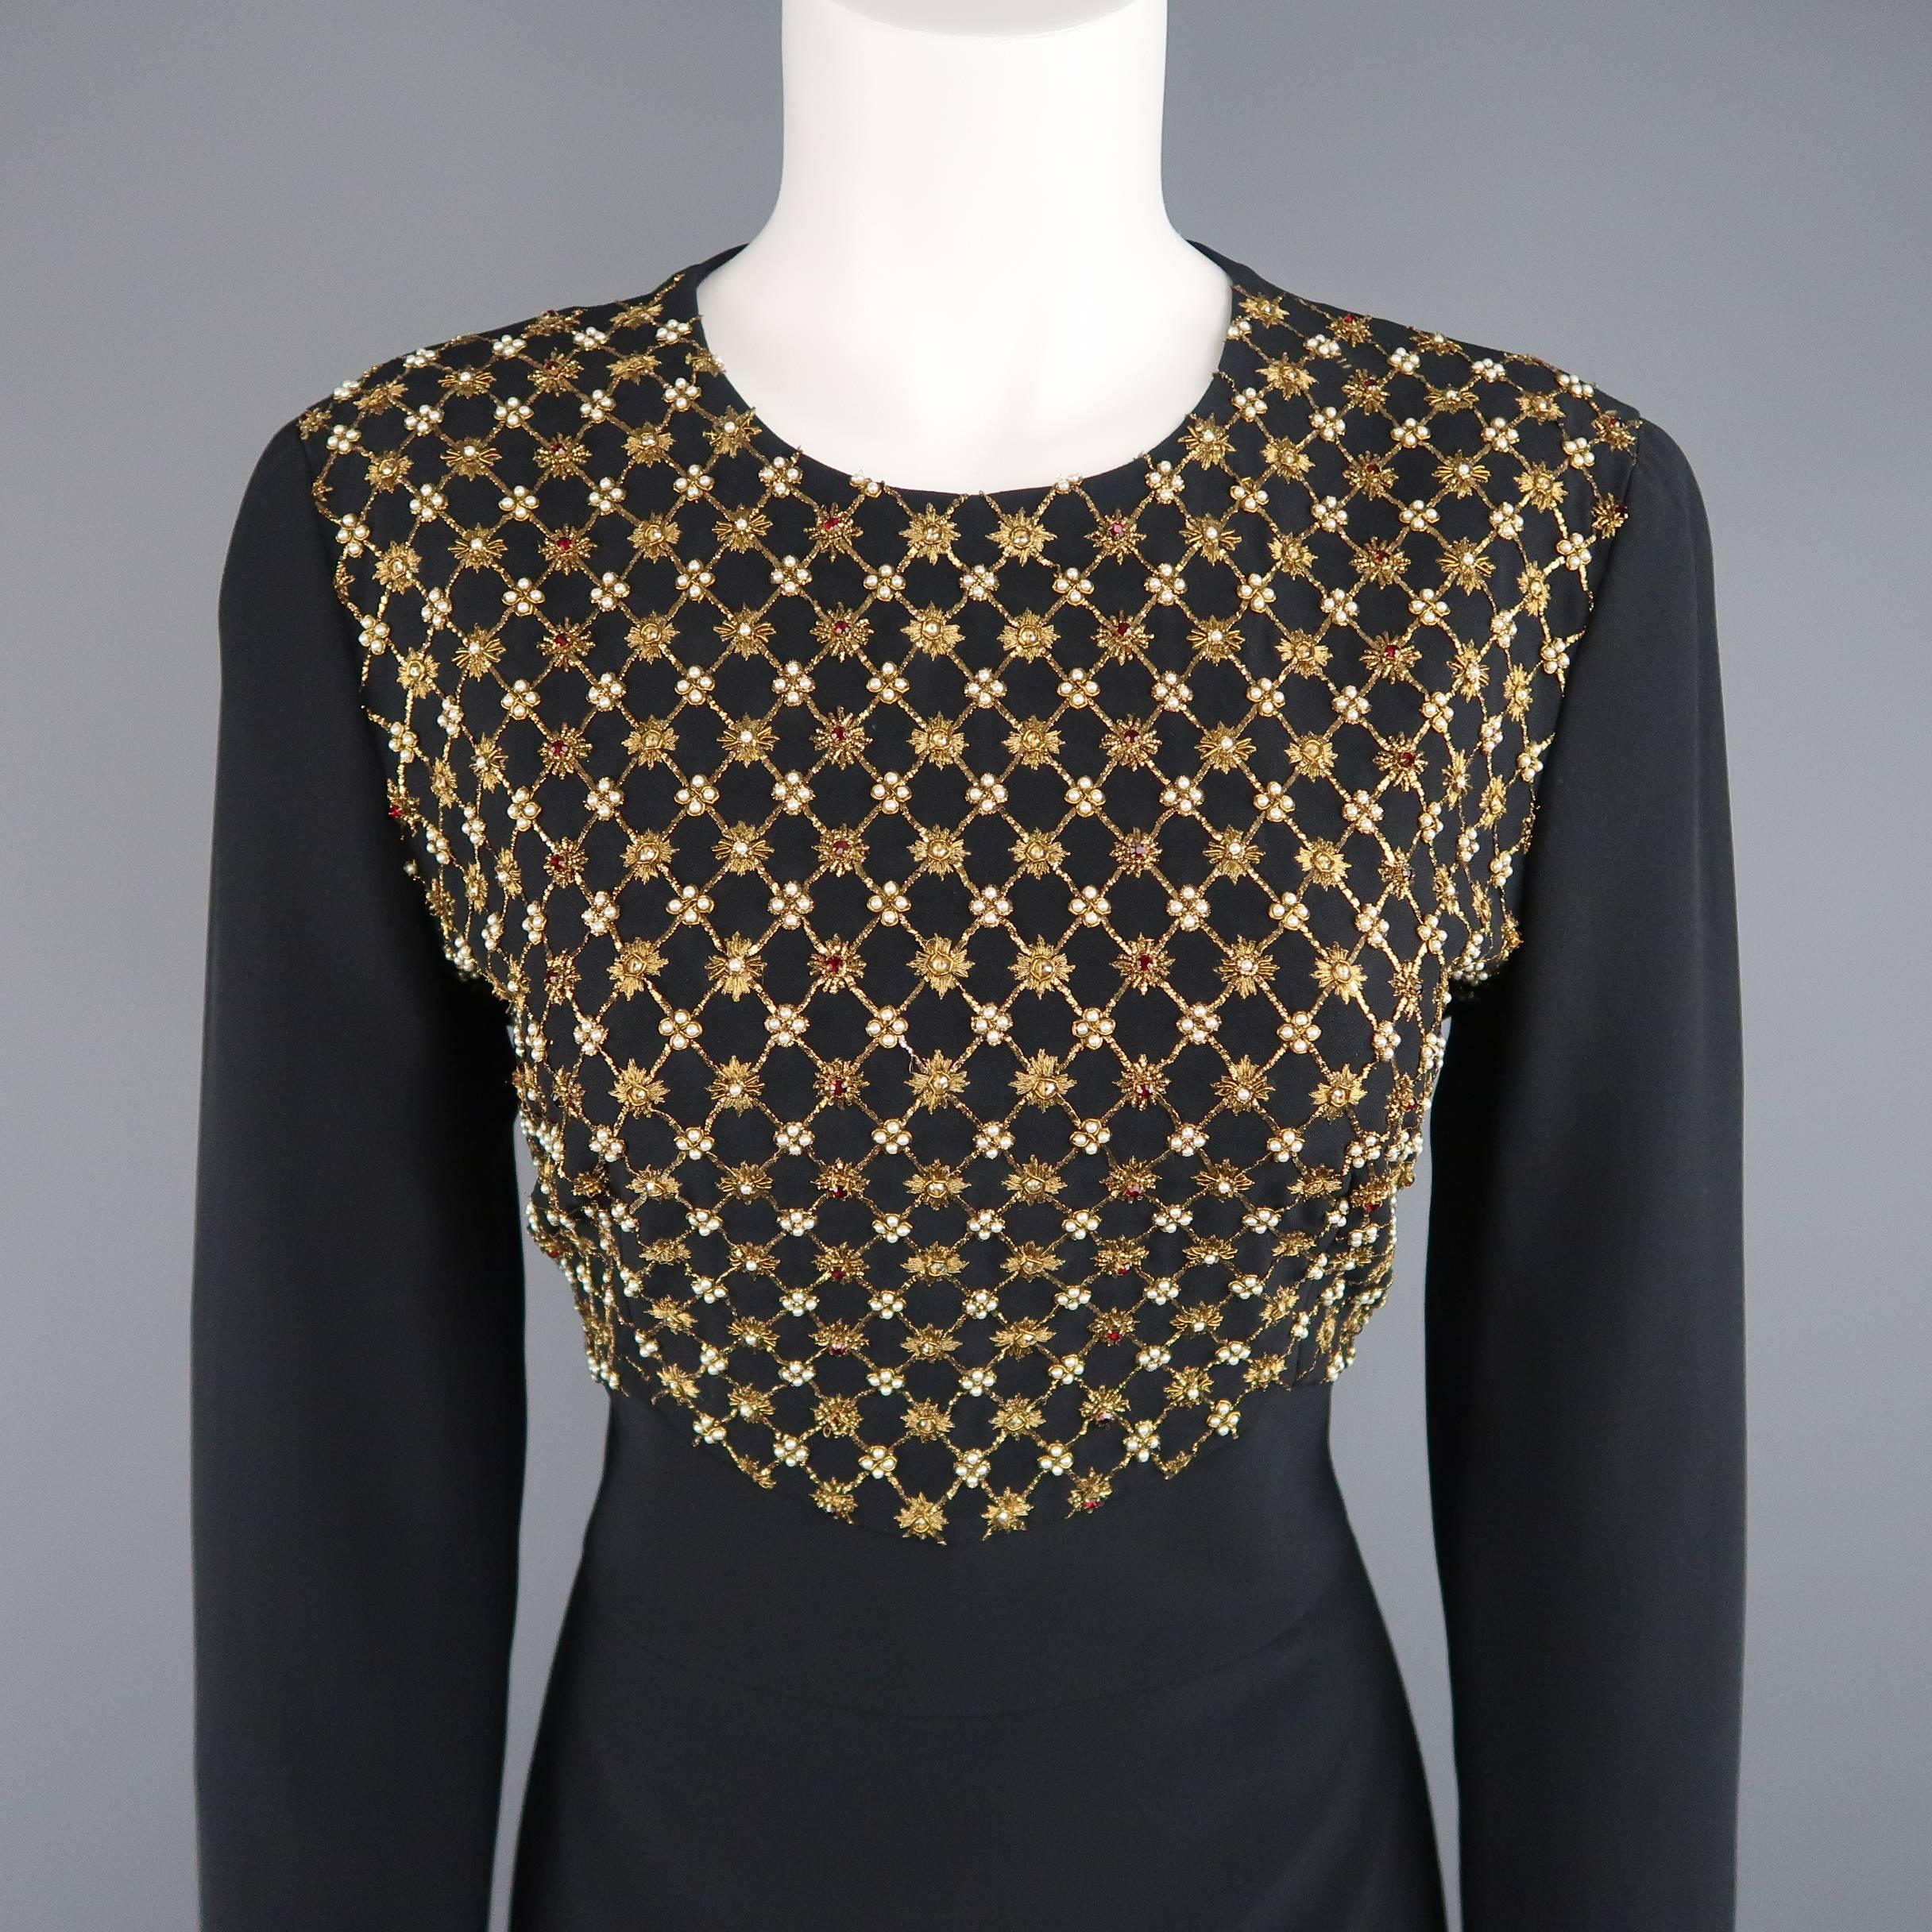 Women's Alexander McQueen Dress - Size 10 Black Gold Embroidered Chest Long Sleeved